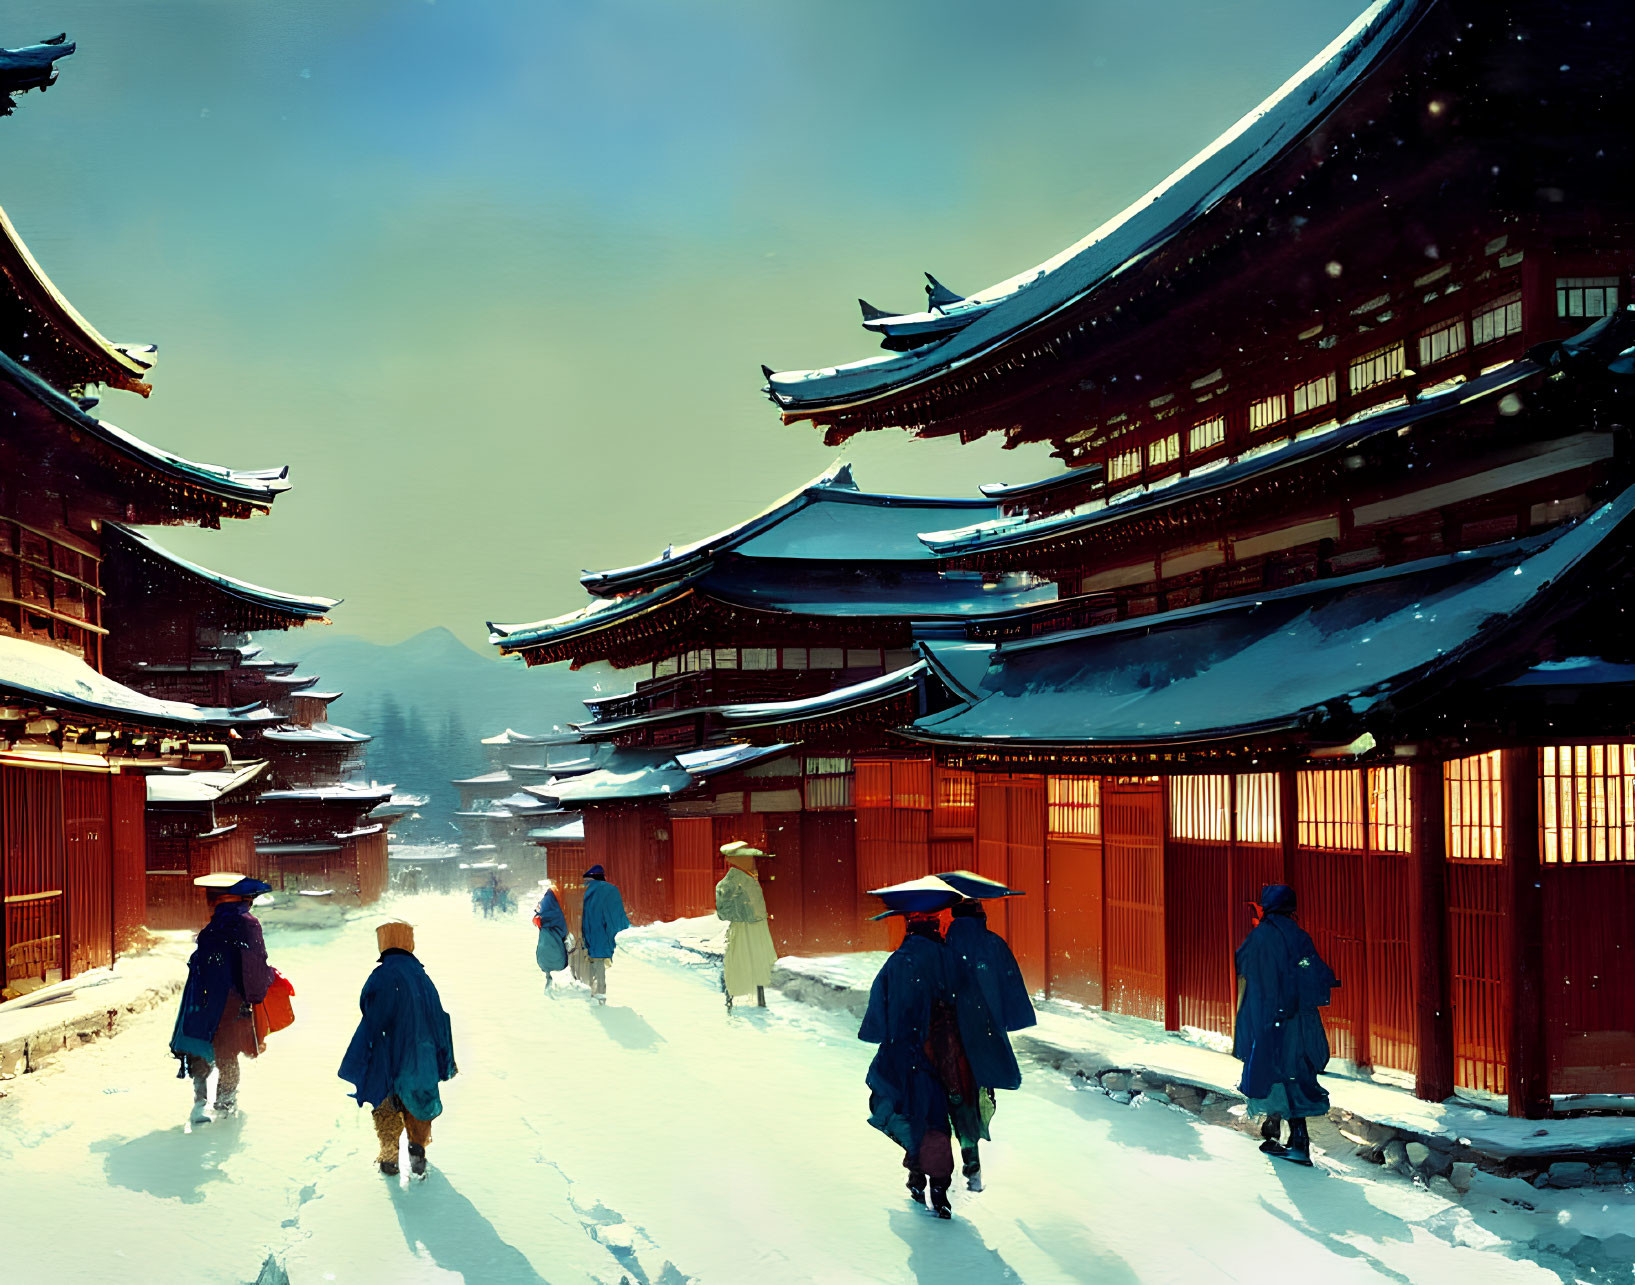 Snow-covered roofs on traditional Japanese buildings with people in historical attire walking along a snowy path